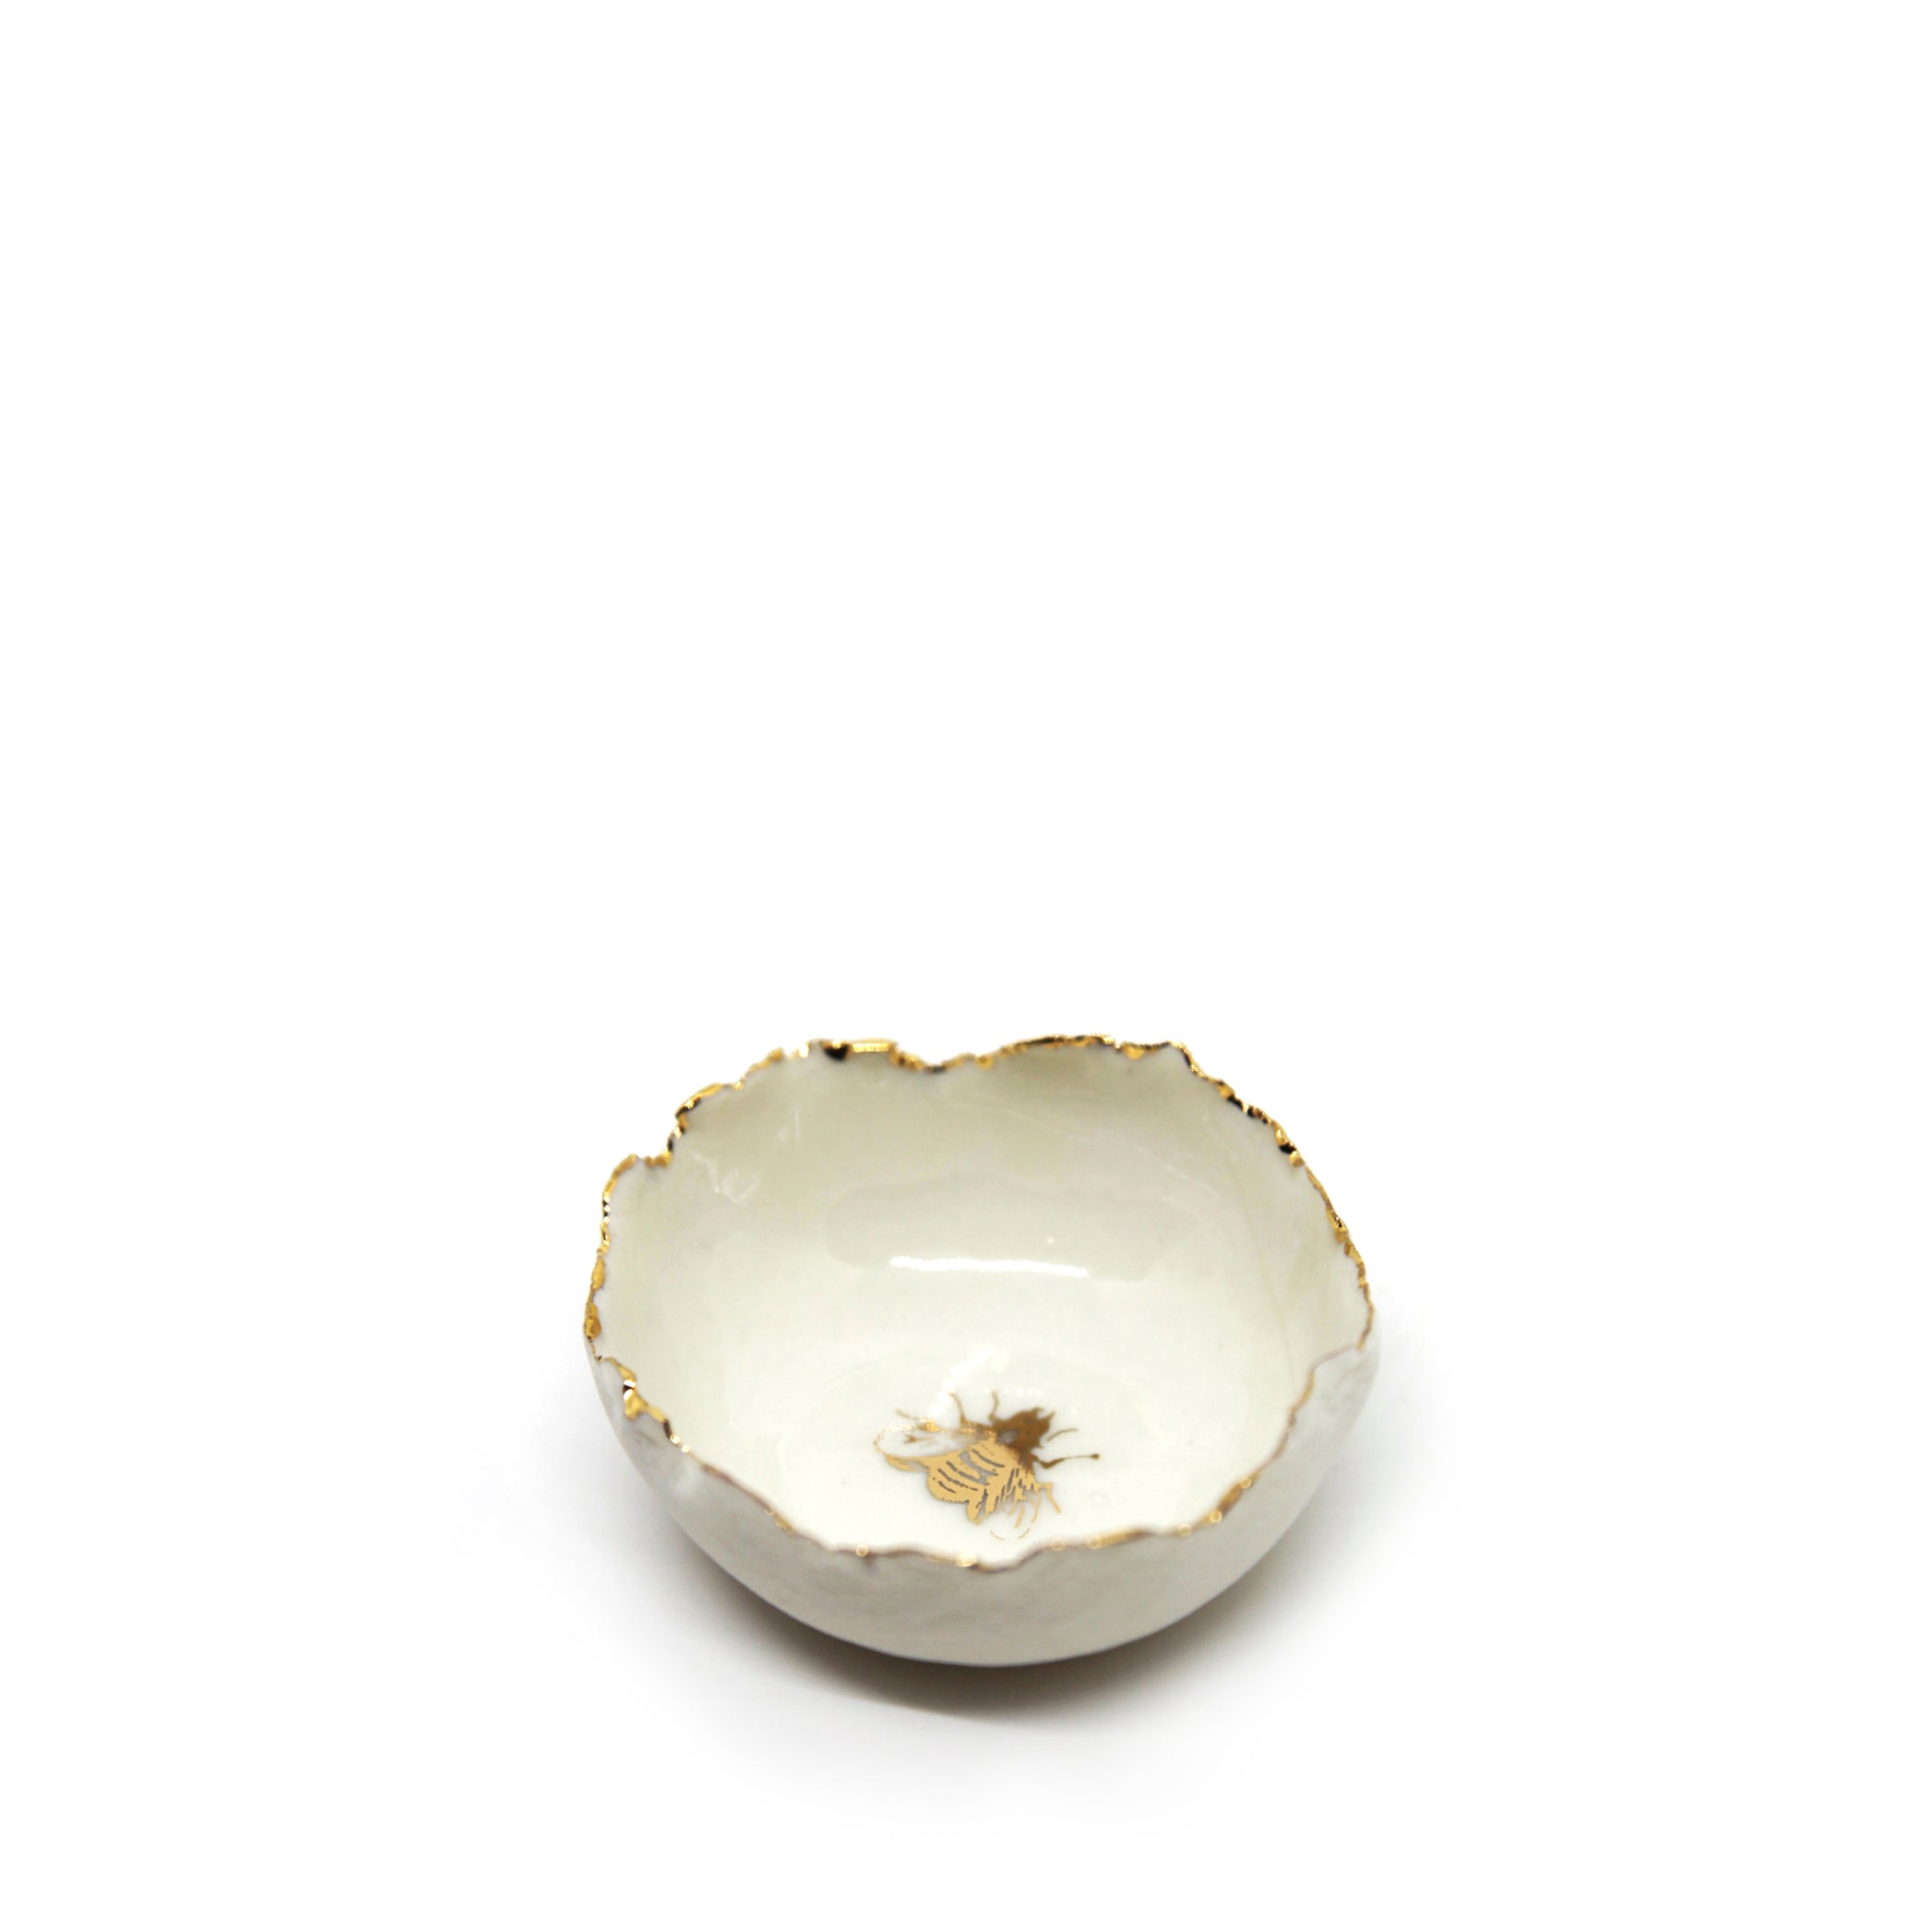 HB Jagged Bowl with Gold Bee, 7cm